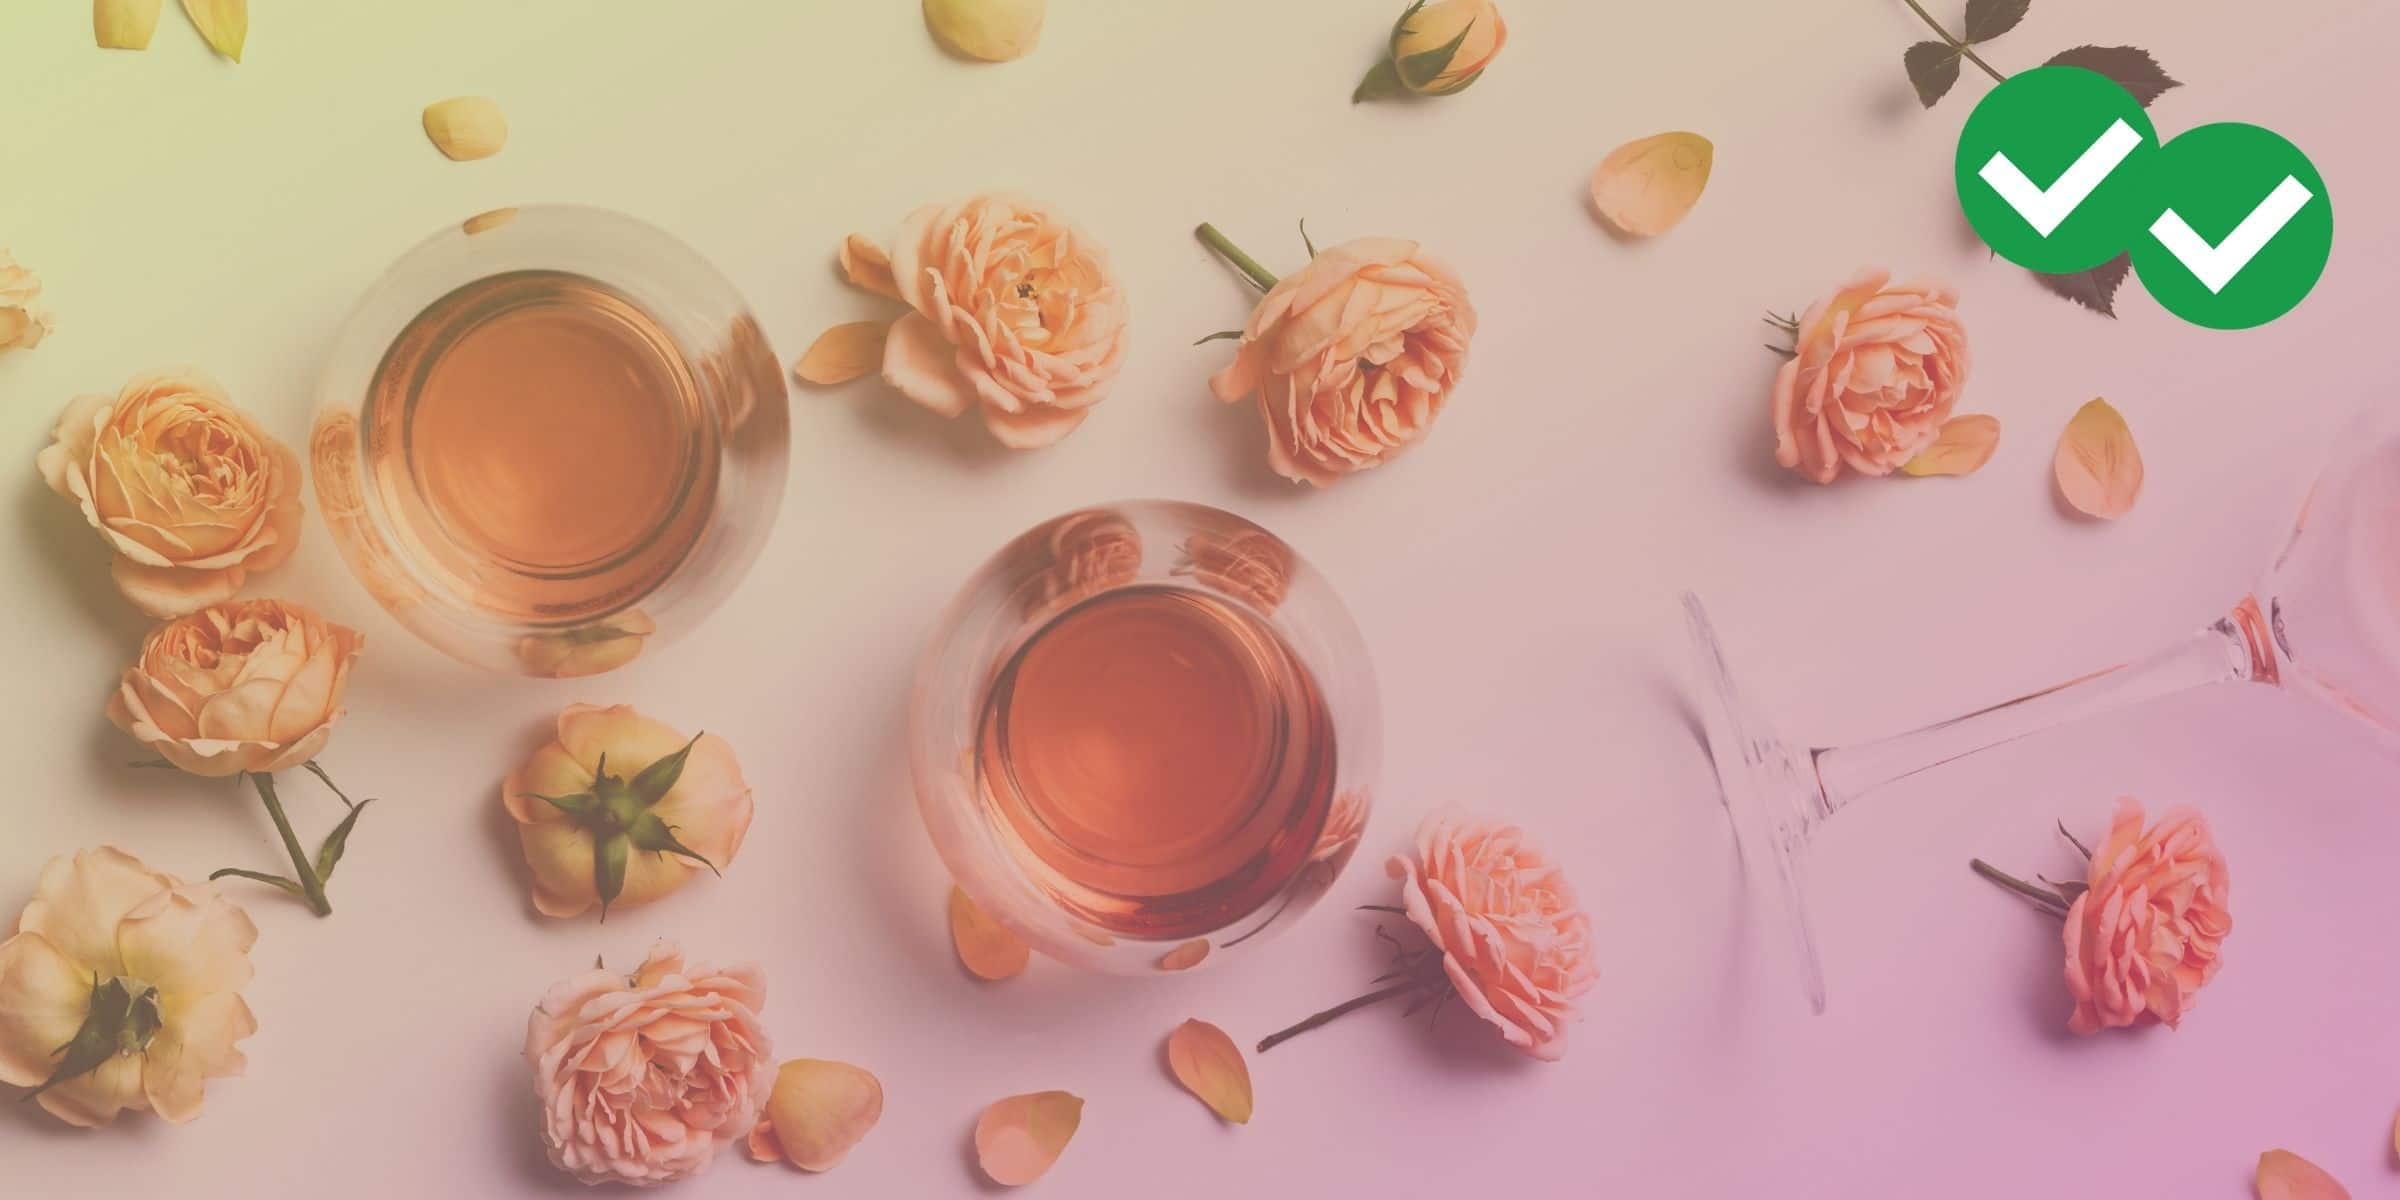 Roses and rose wine for Magoosh GRE and Moira Rose vocabulary list